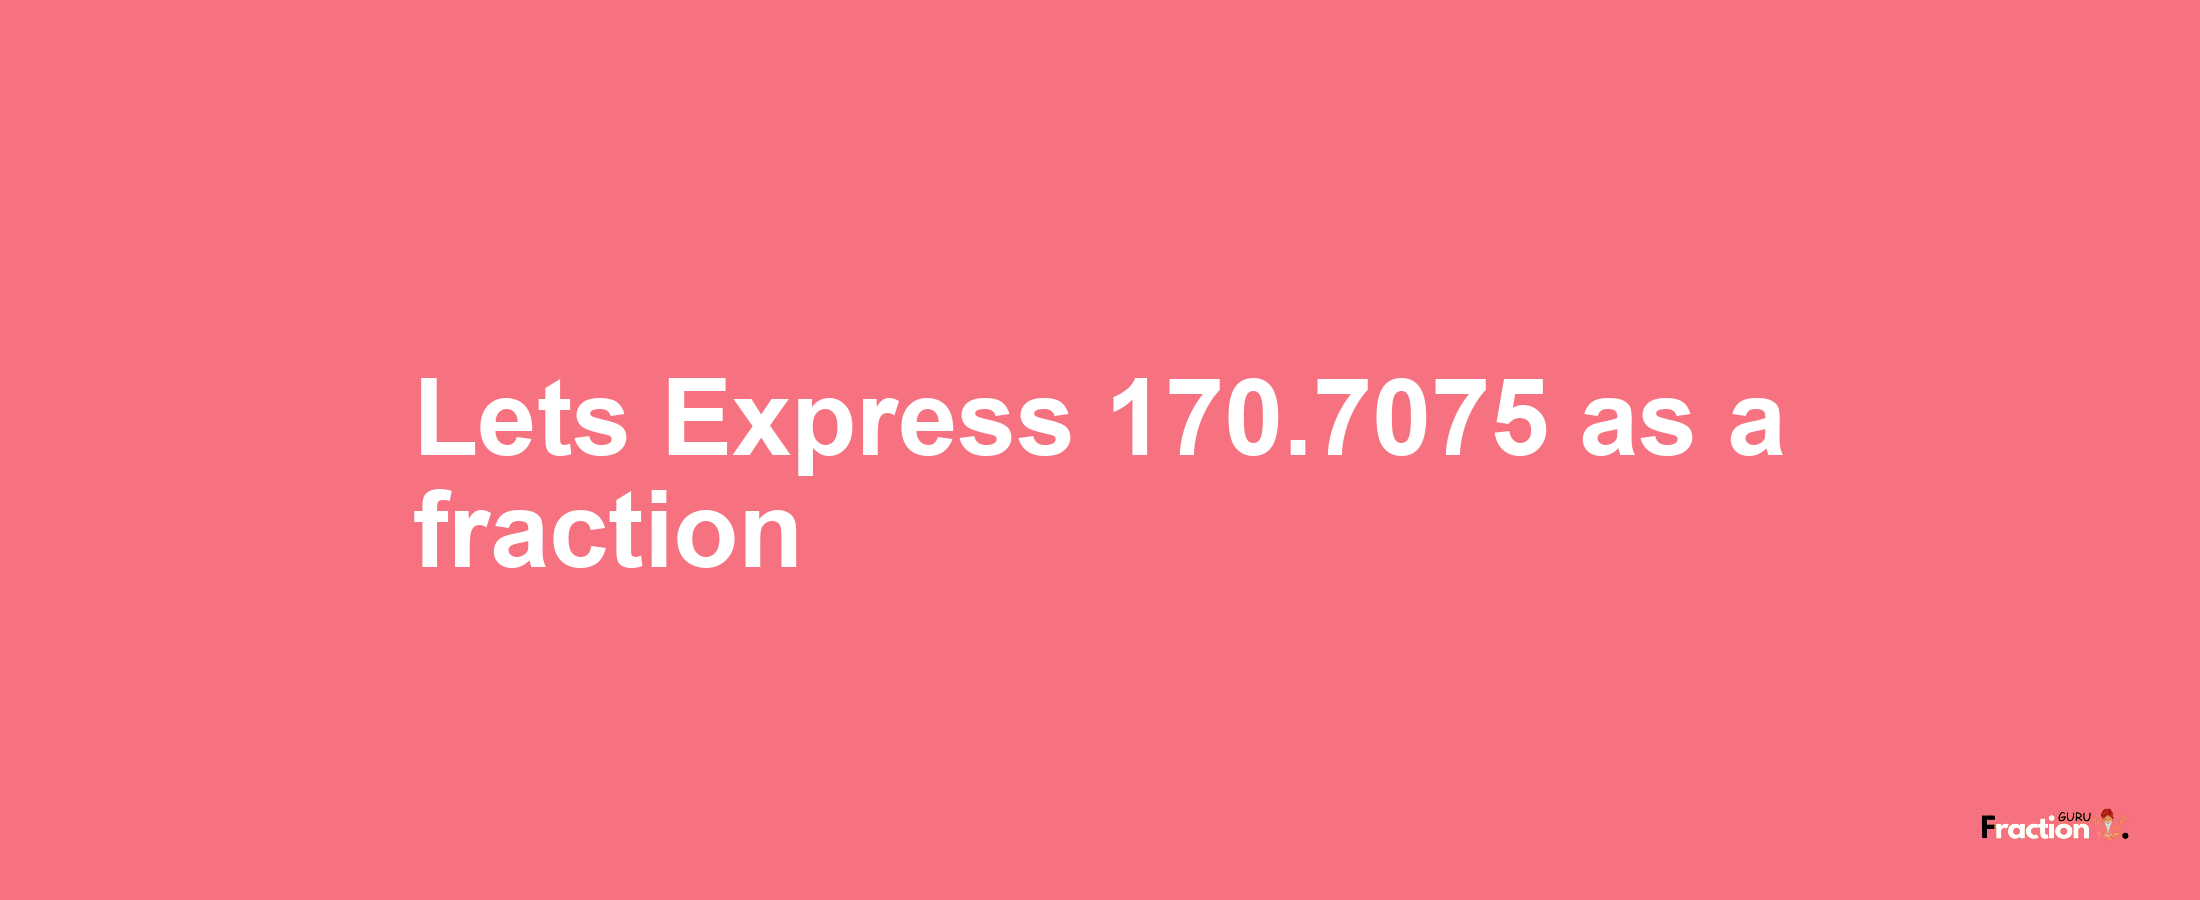 Lets Express 170.7075 as afraction